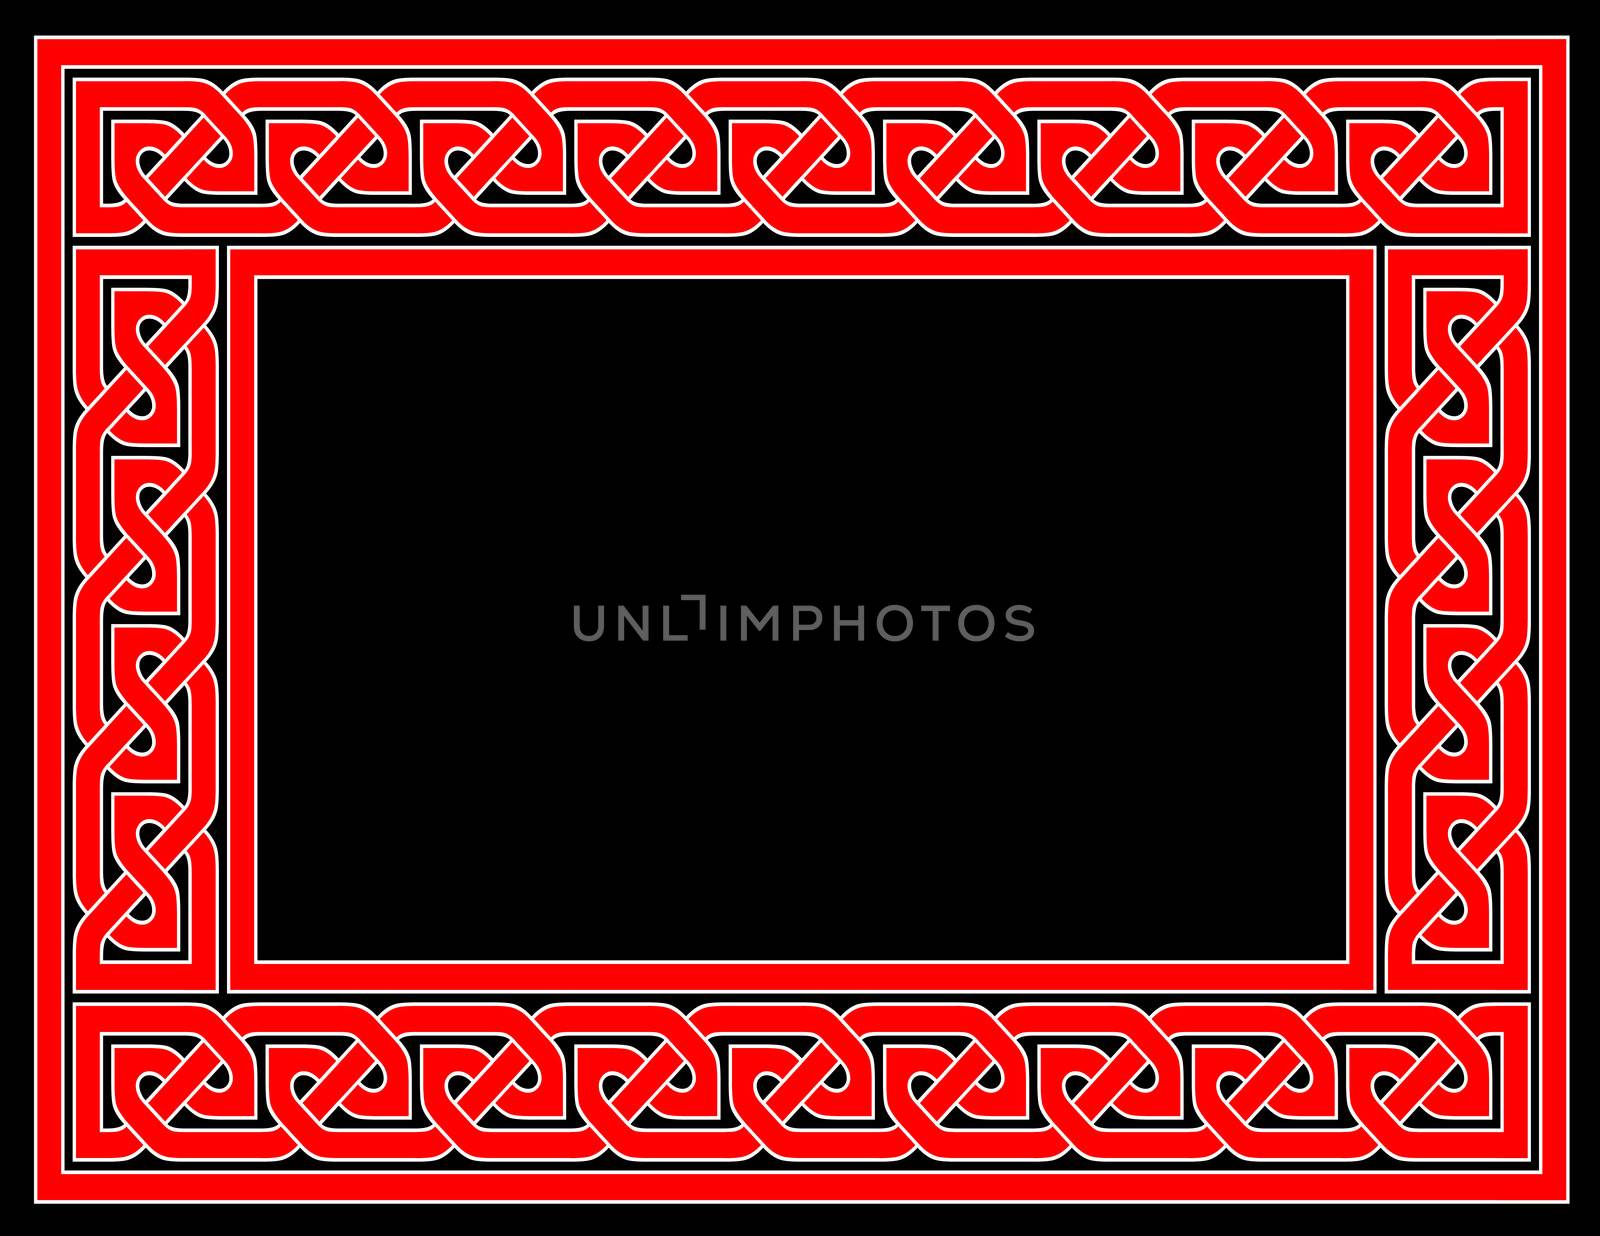 Red Celtic Knot Frame with Black Background - JPG by suwanneeredhead